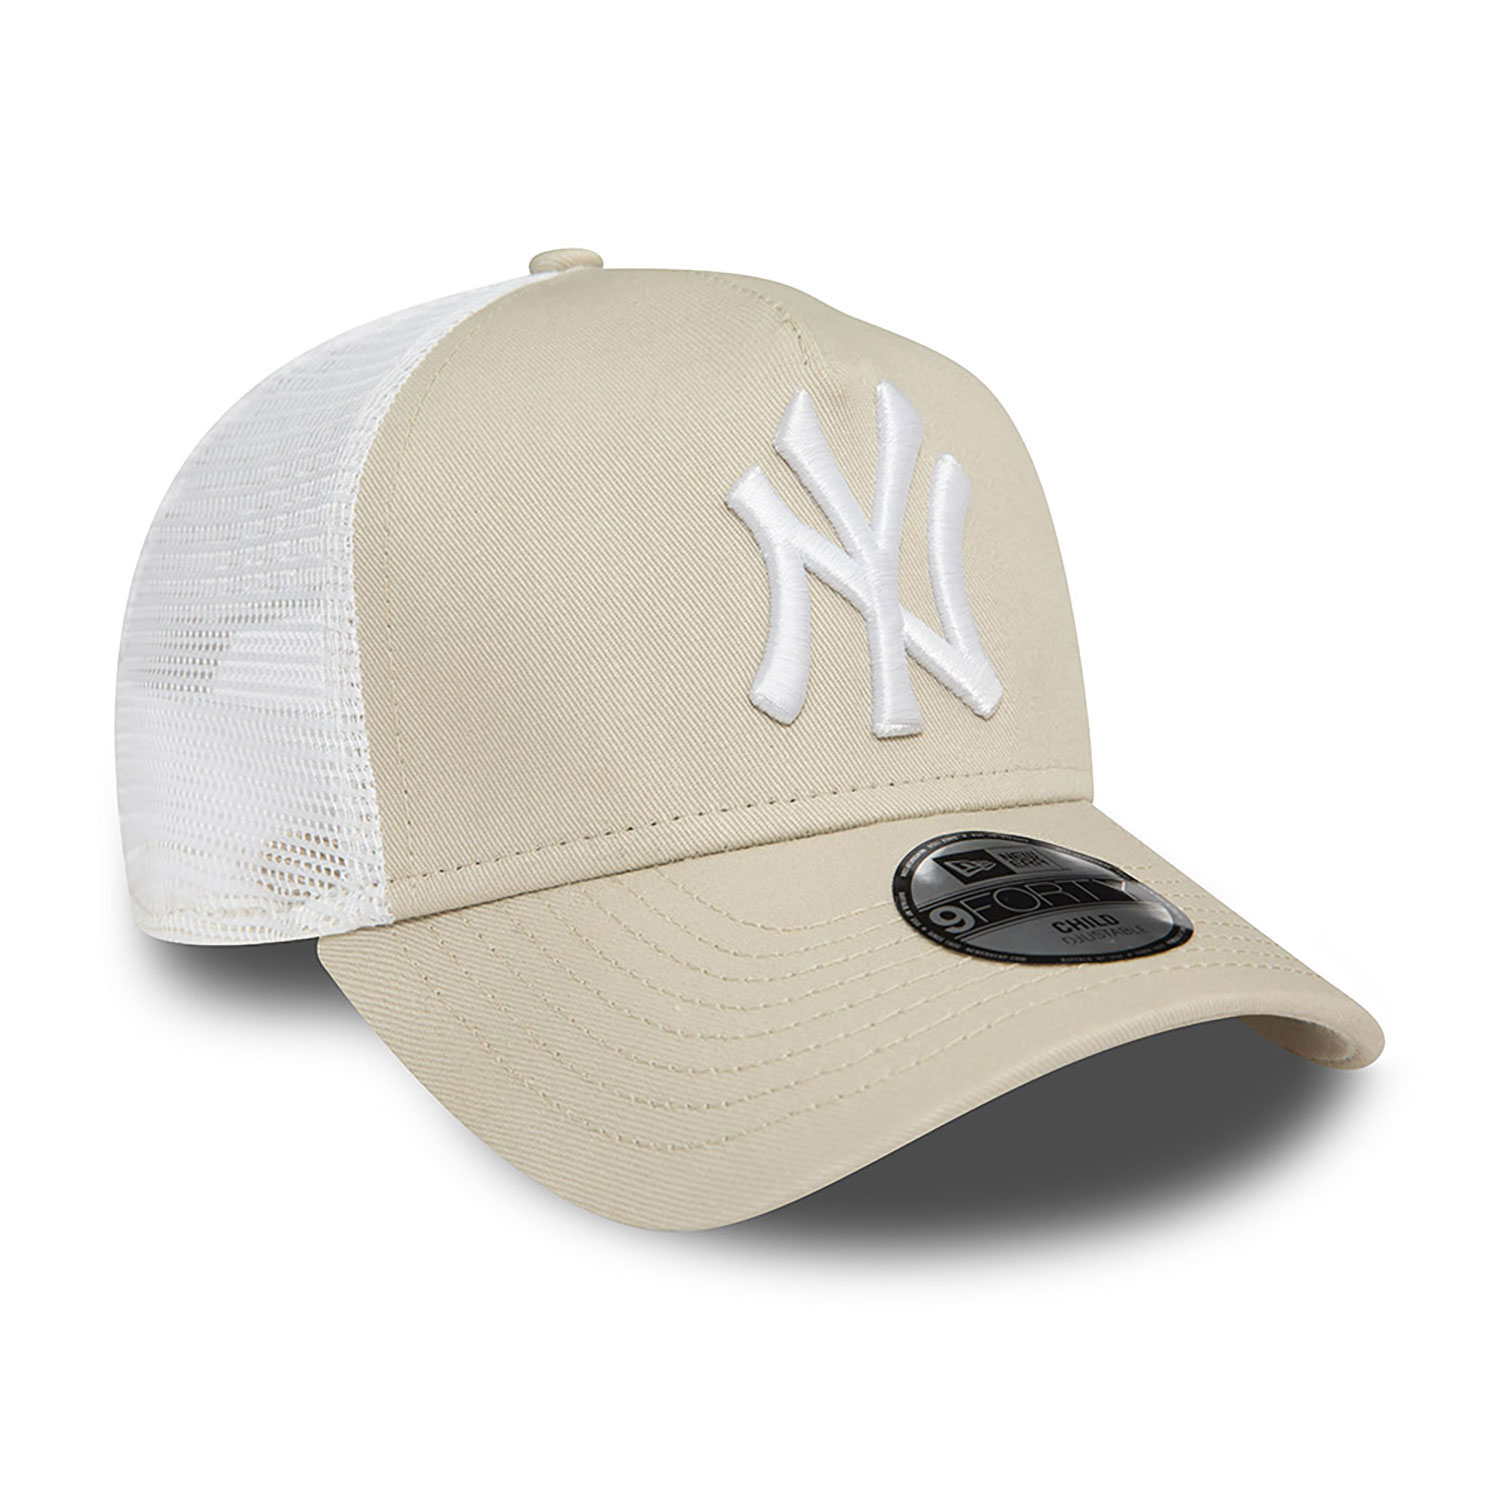 New York Yankees Youth League Essential Stone A-Frame Trucker Cap